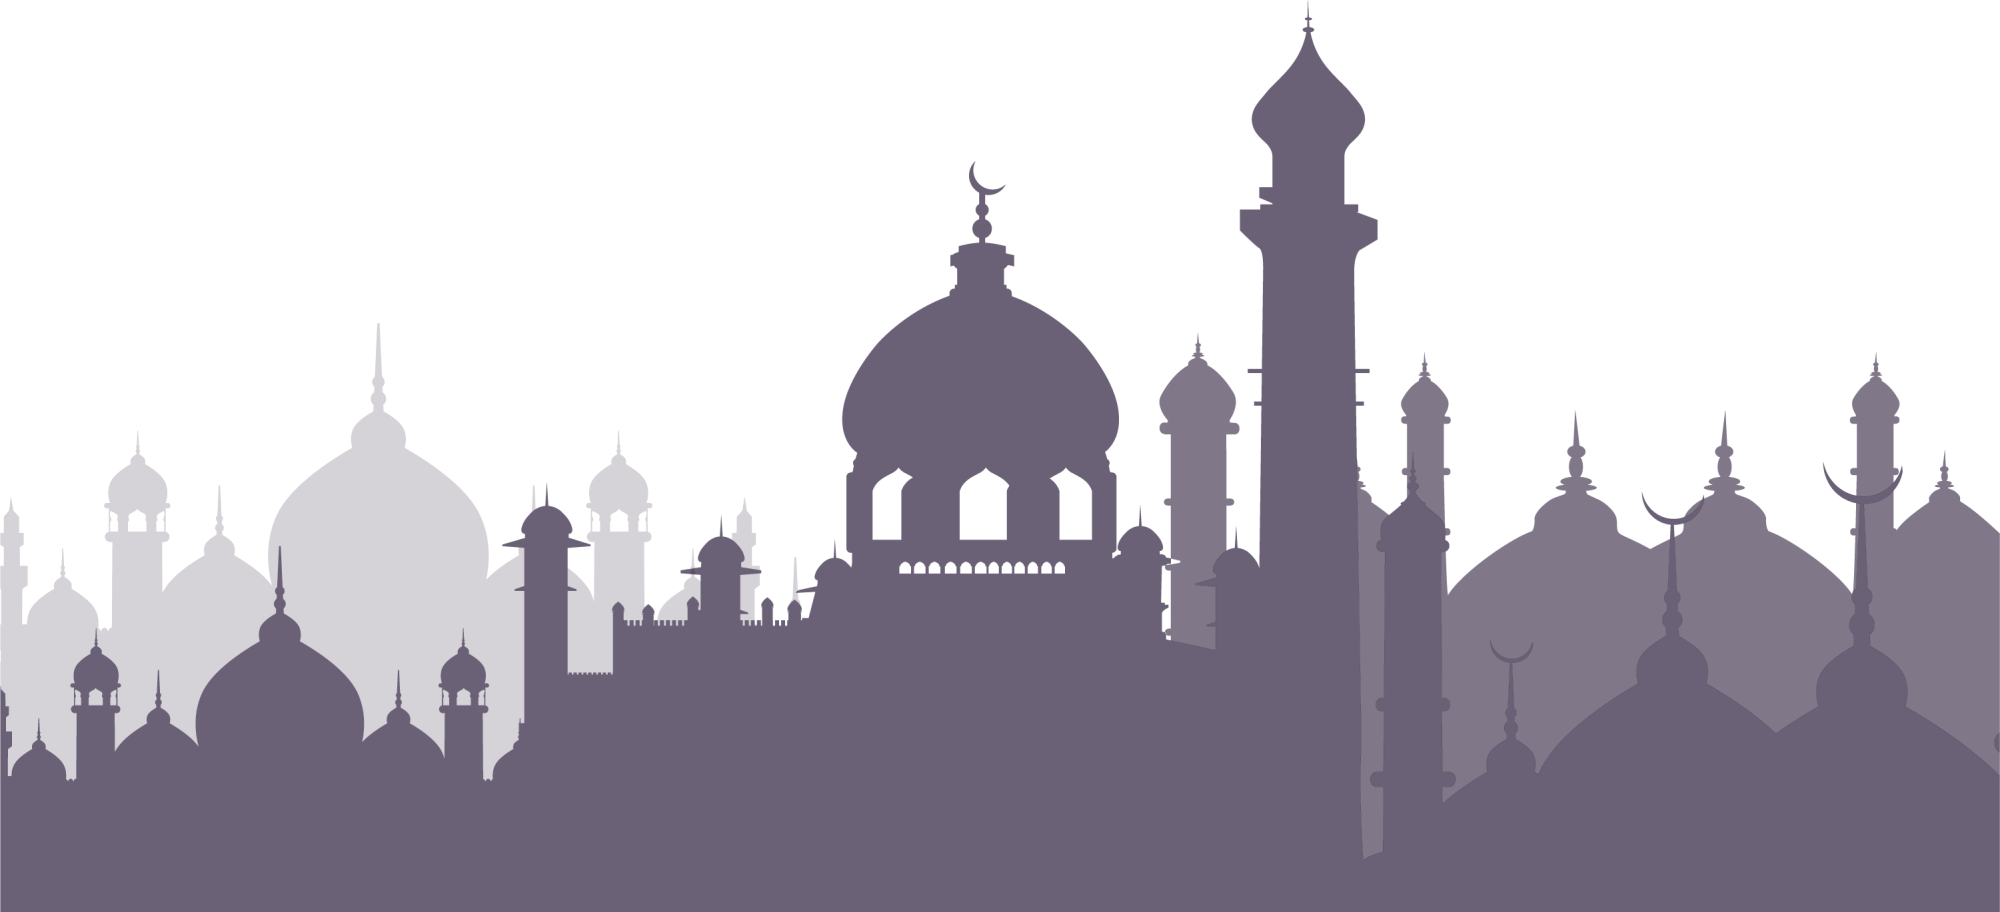 Muslim Background Hd Png High Quality Images For Free